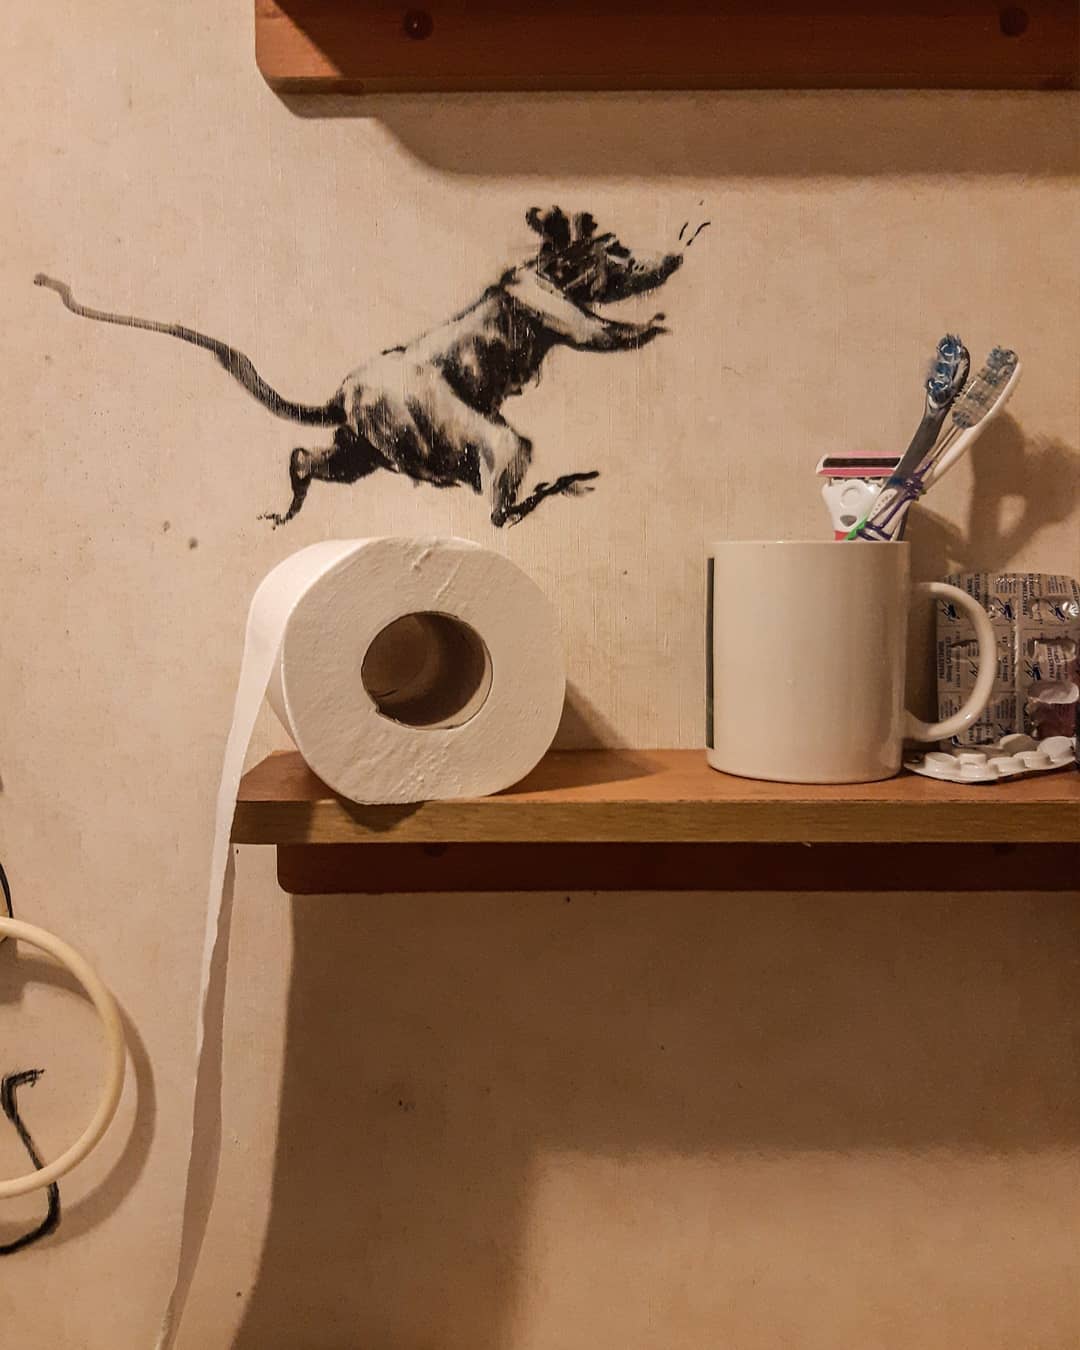 Banksy – “Working From Home”